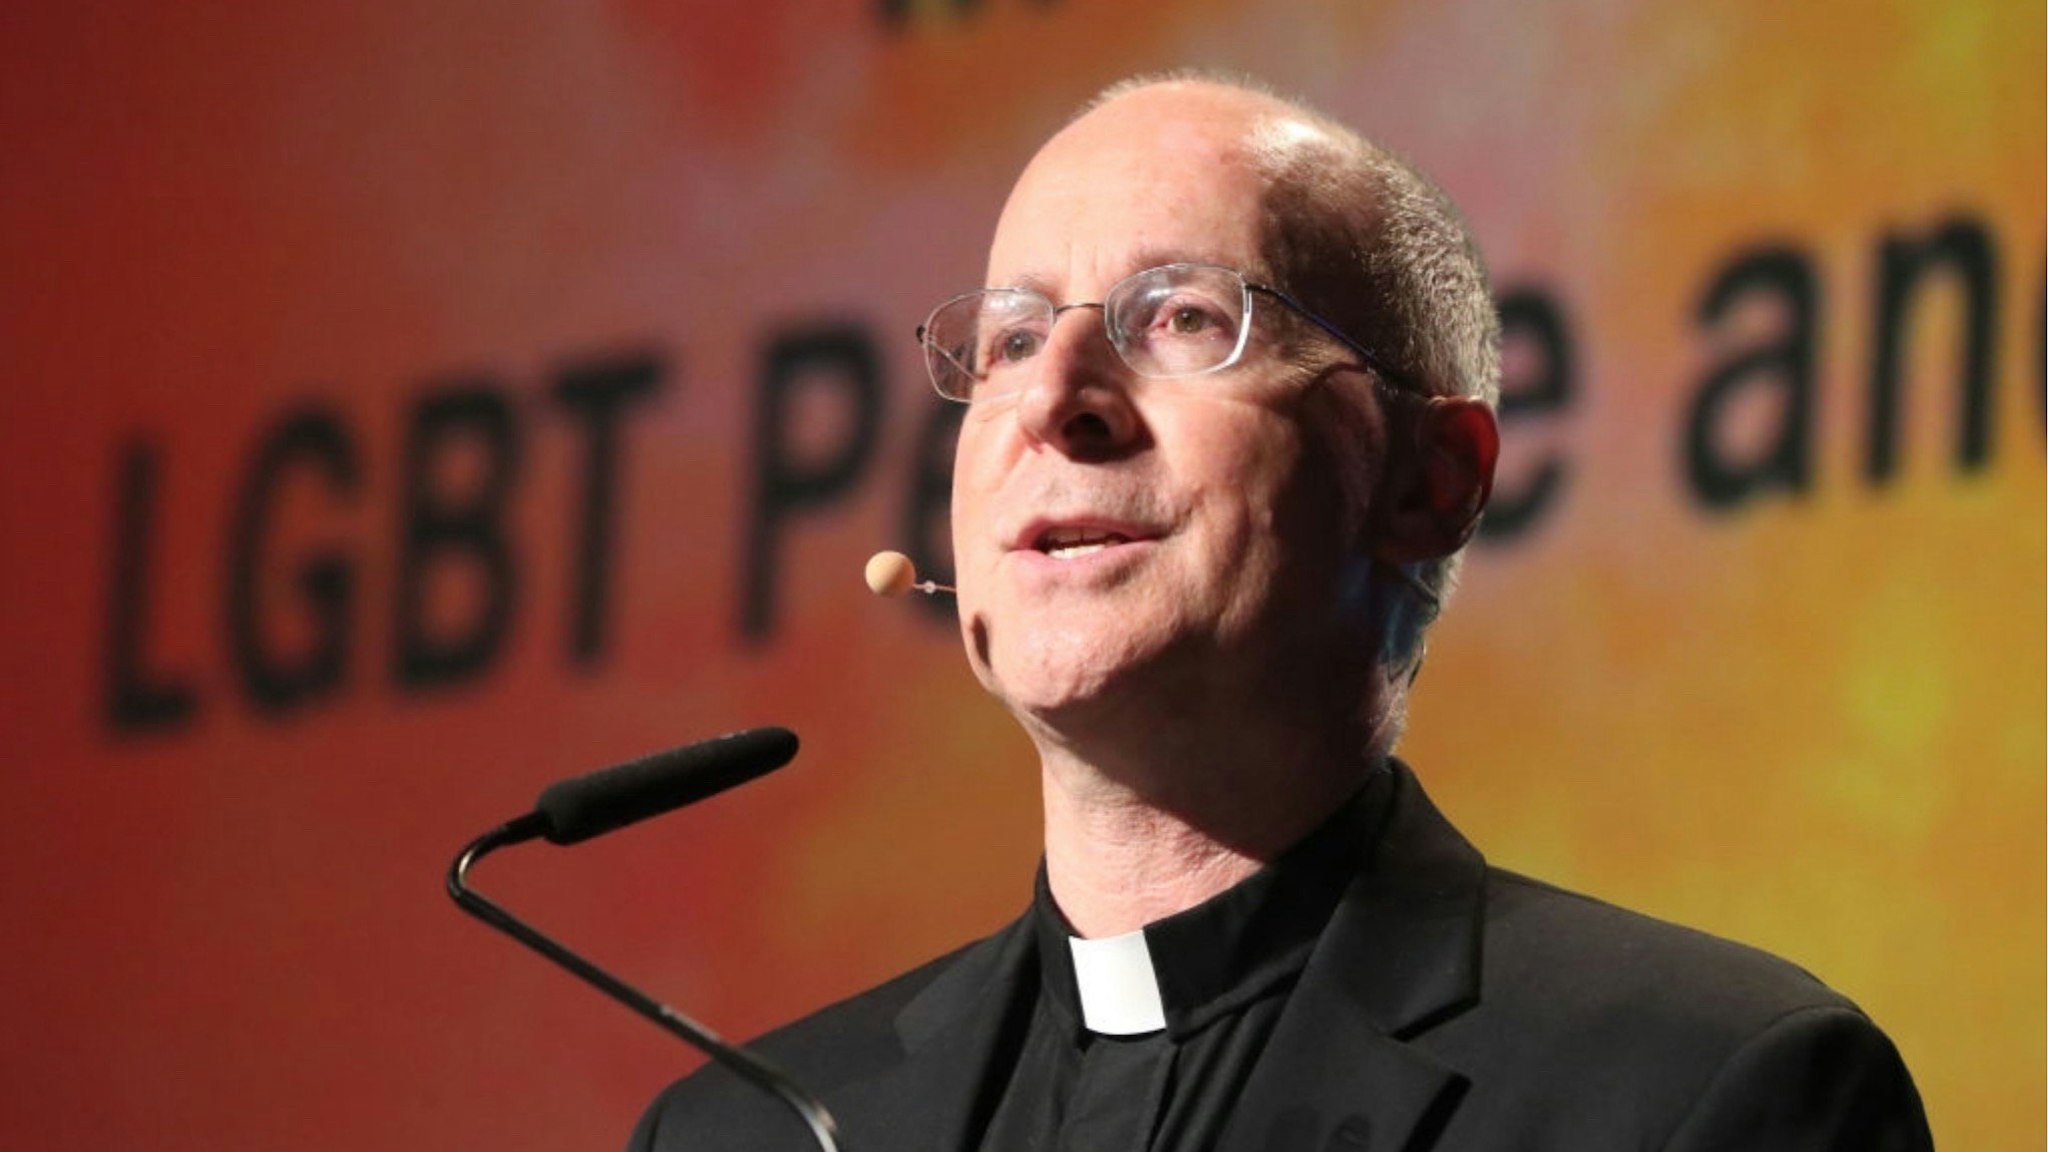 US priest Father James Martin speaking at the world meeting of families in Dublin, on how the Catholic Church can welcome members of the LGBT community.